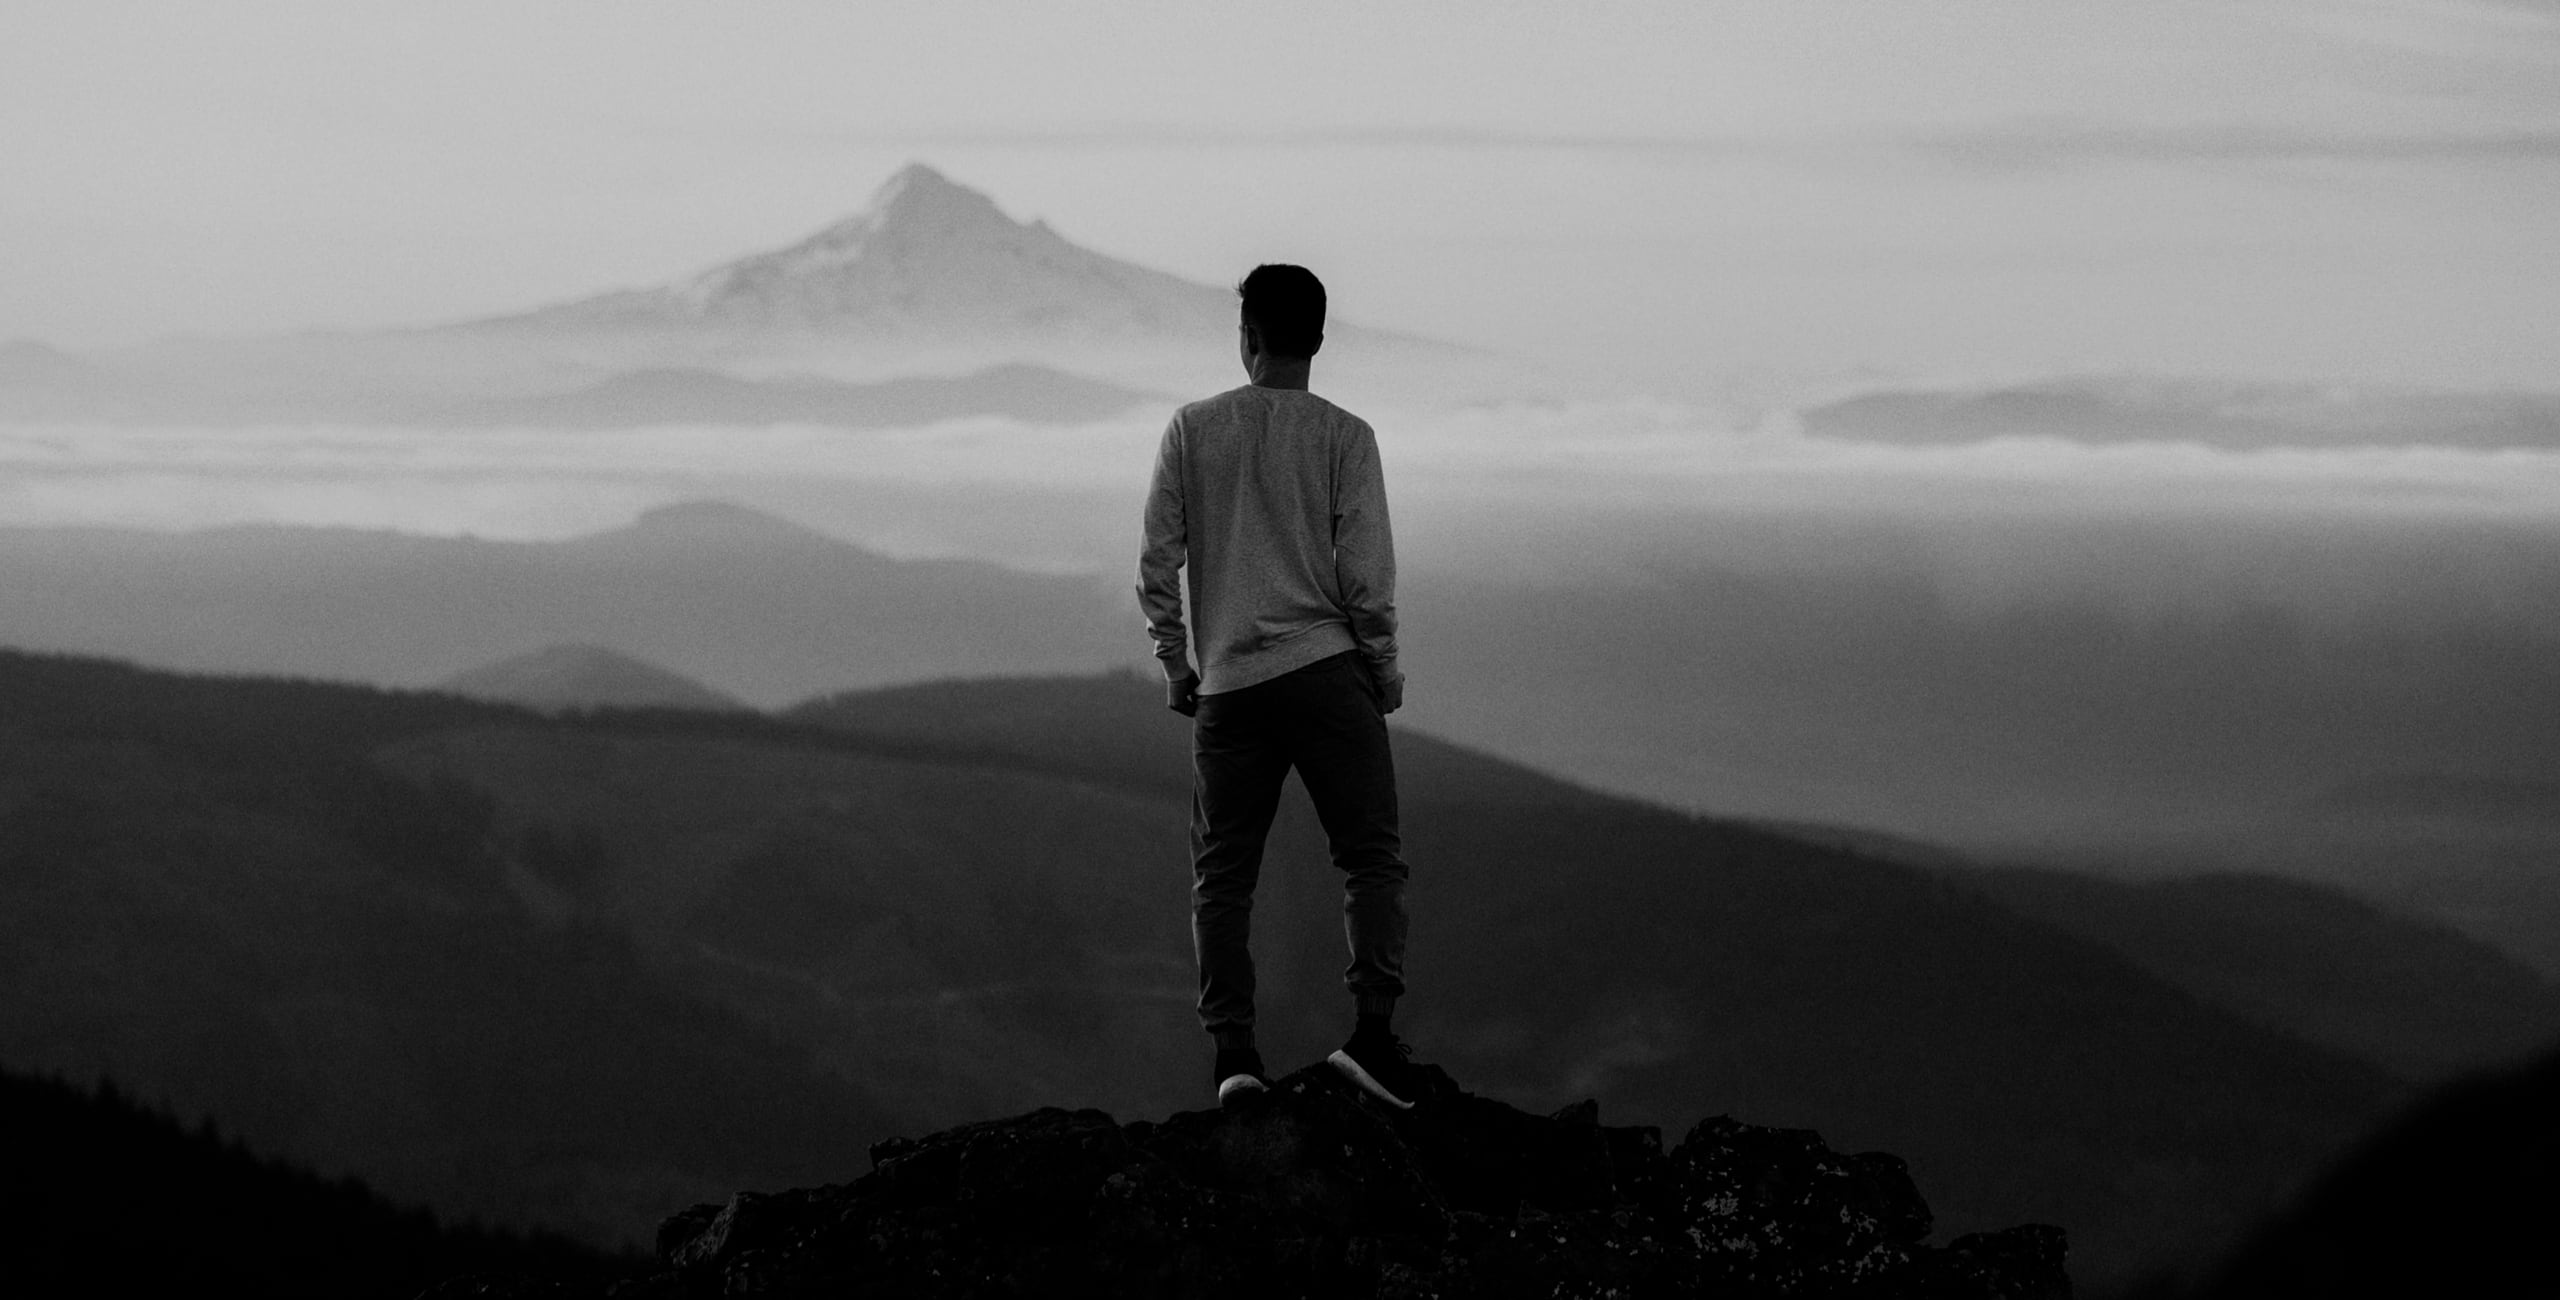 A man standing on top of a mountain with mountains in the background.